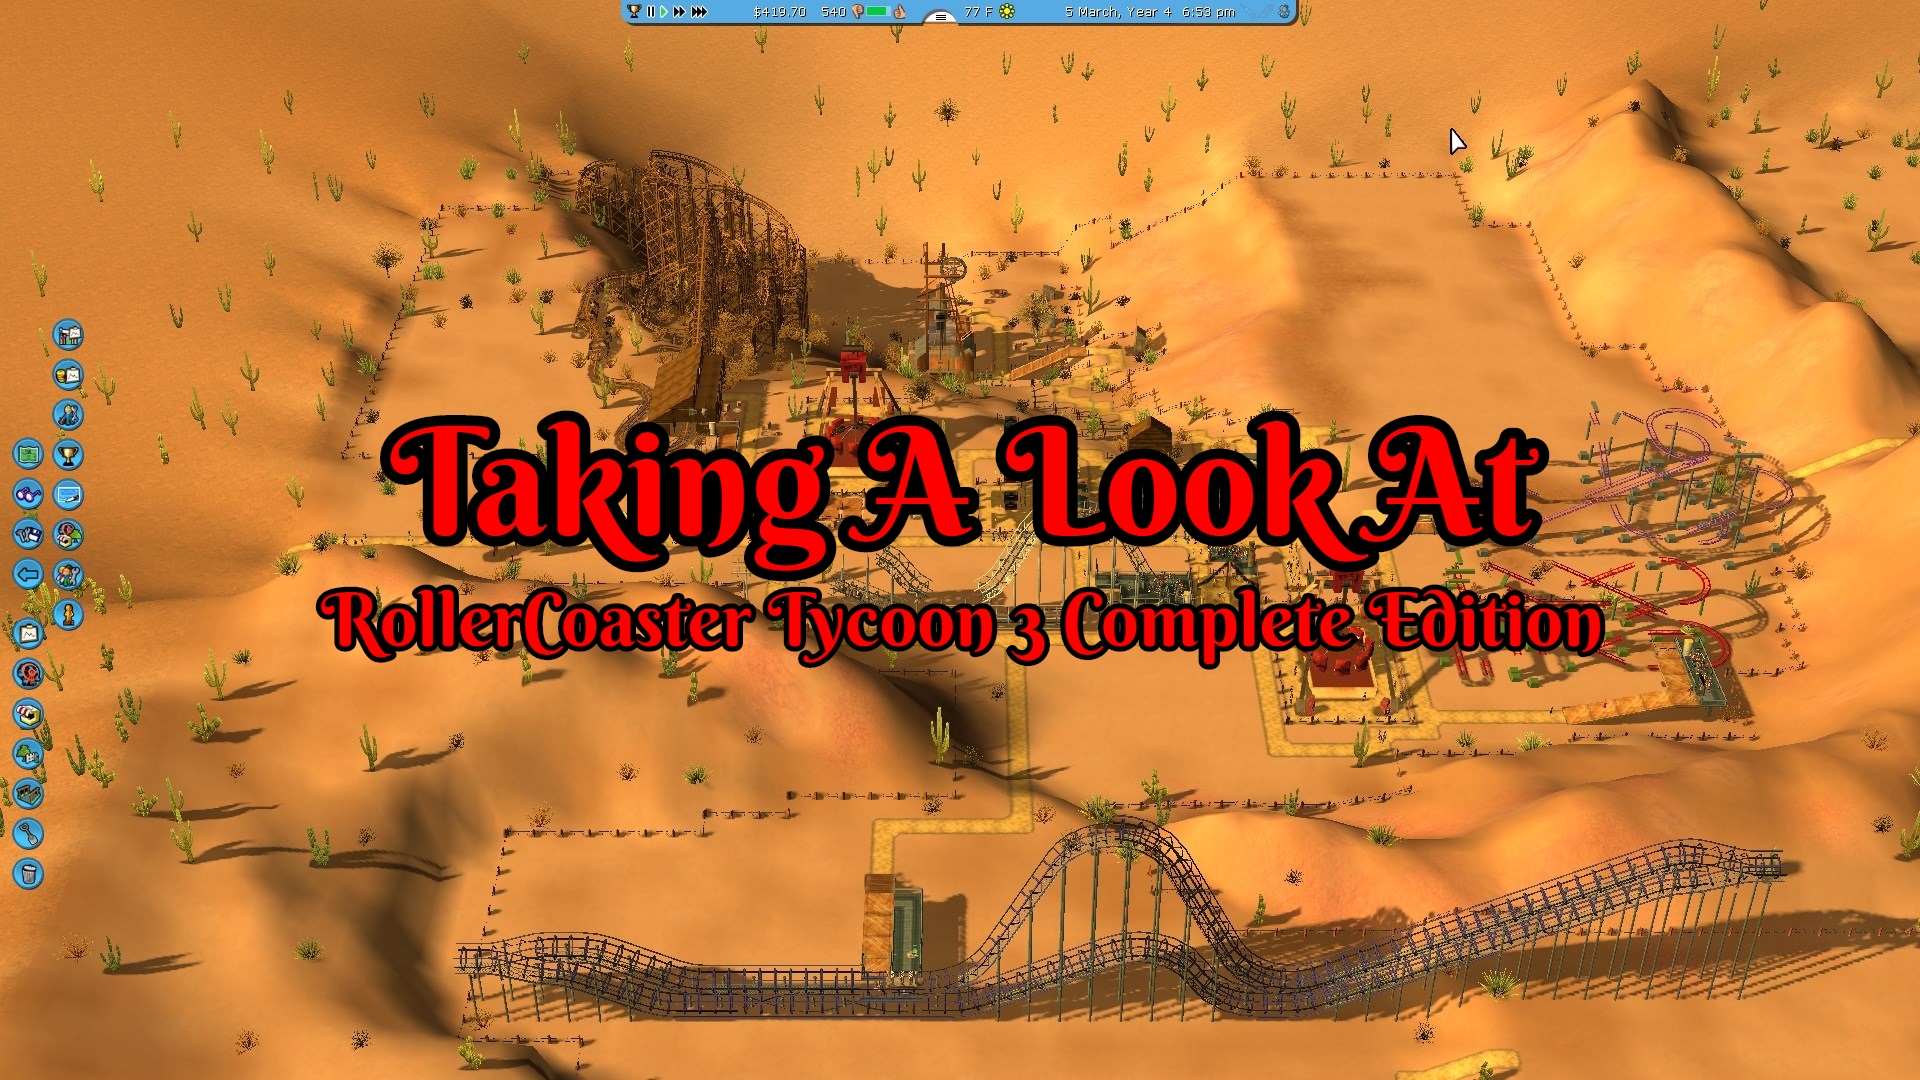 RollerCoaster Tycoon 3 Complete Edition rollercoaster simulation.jpg